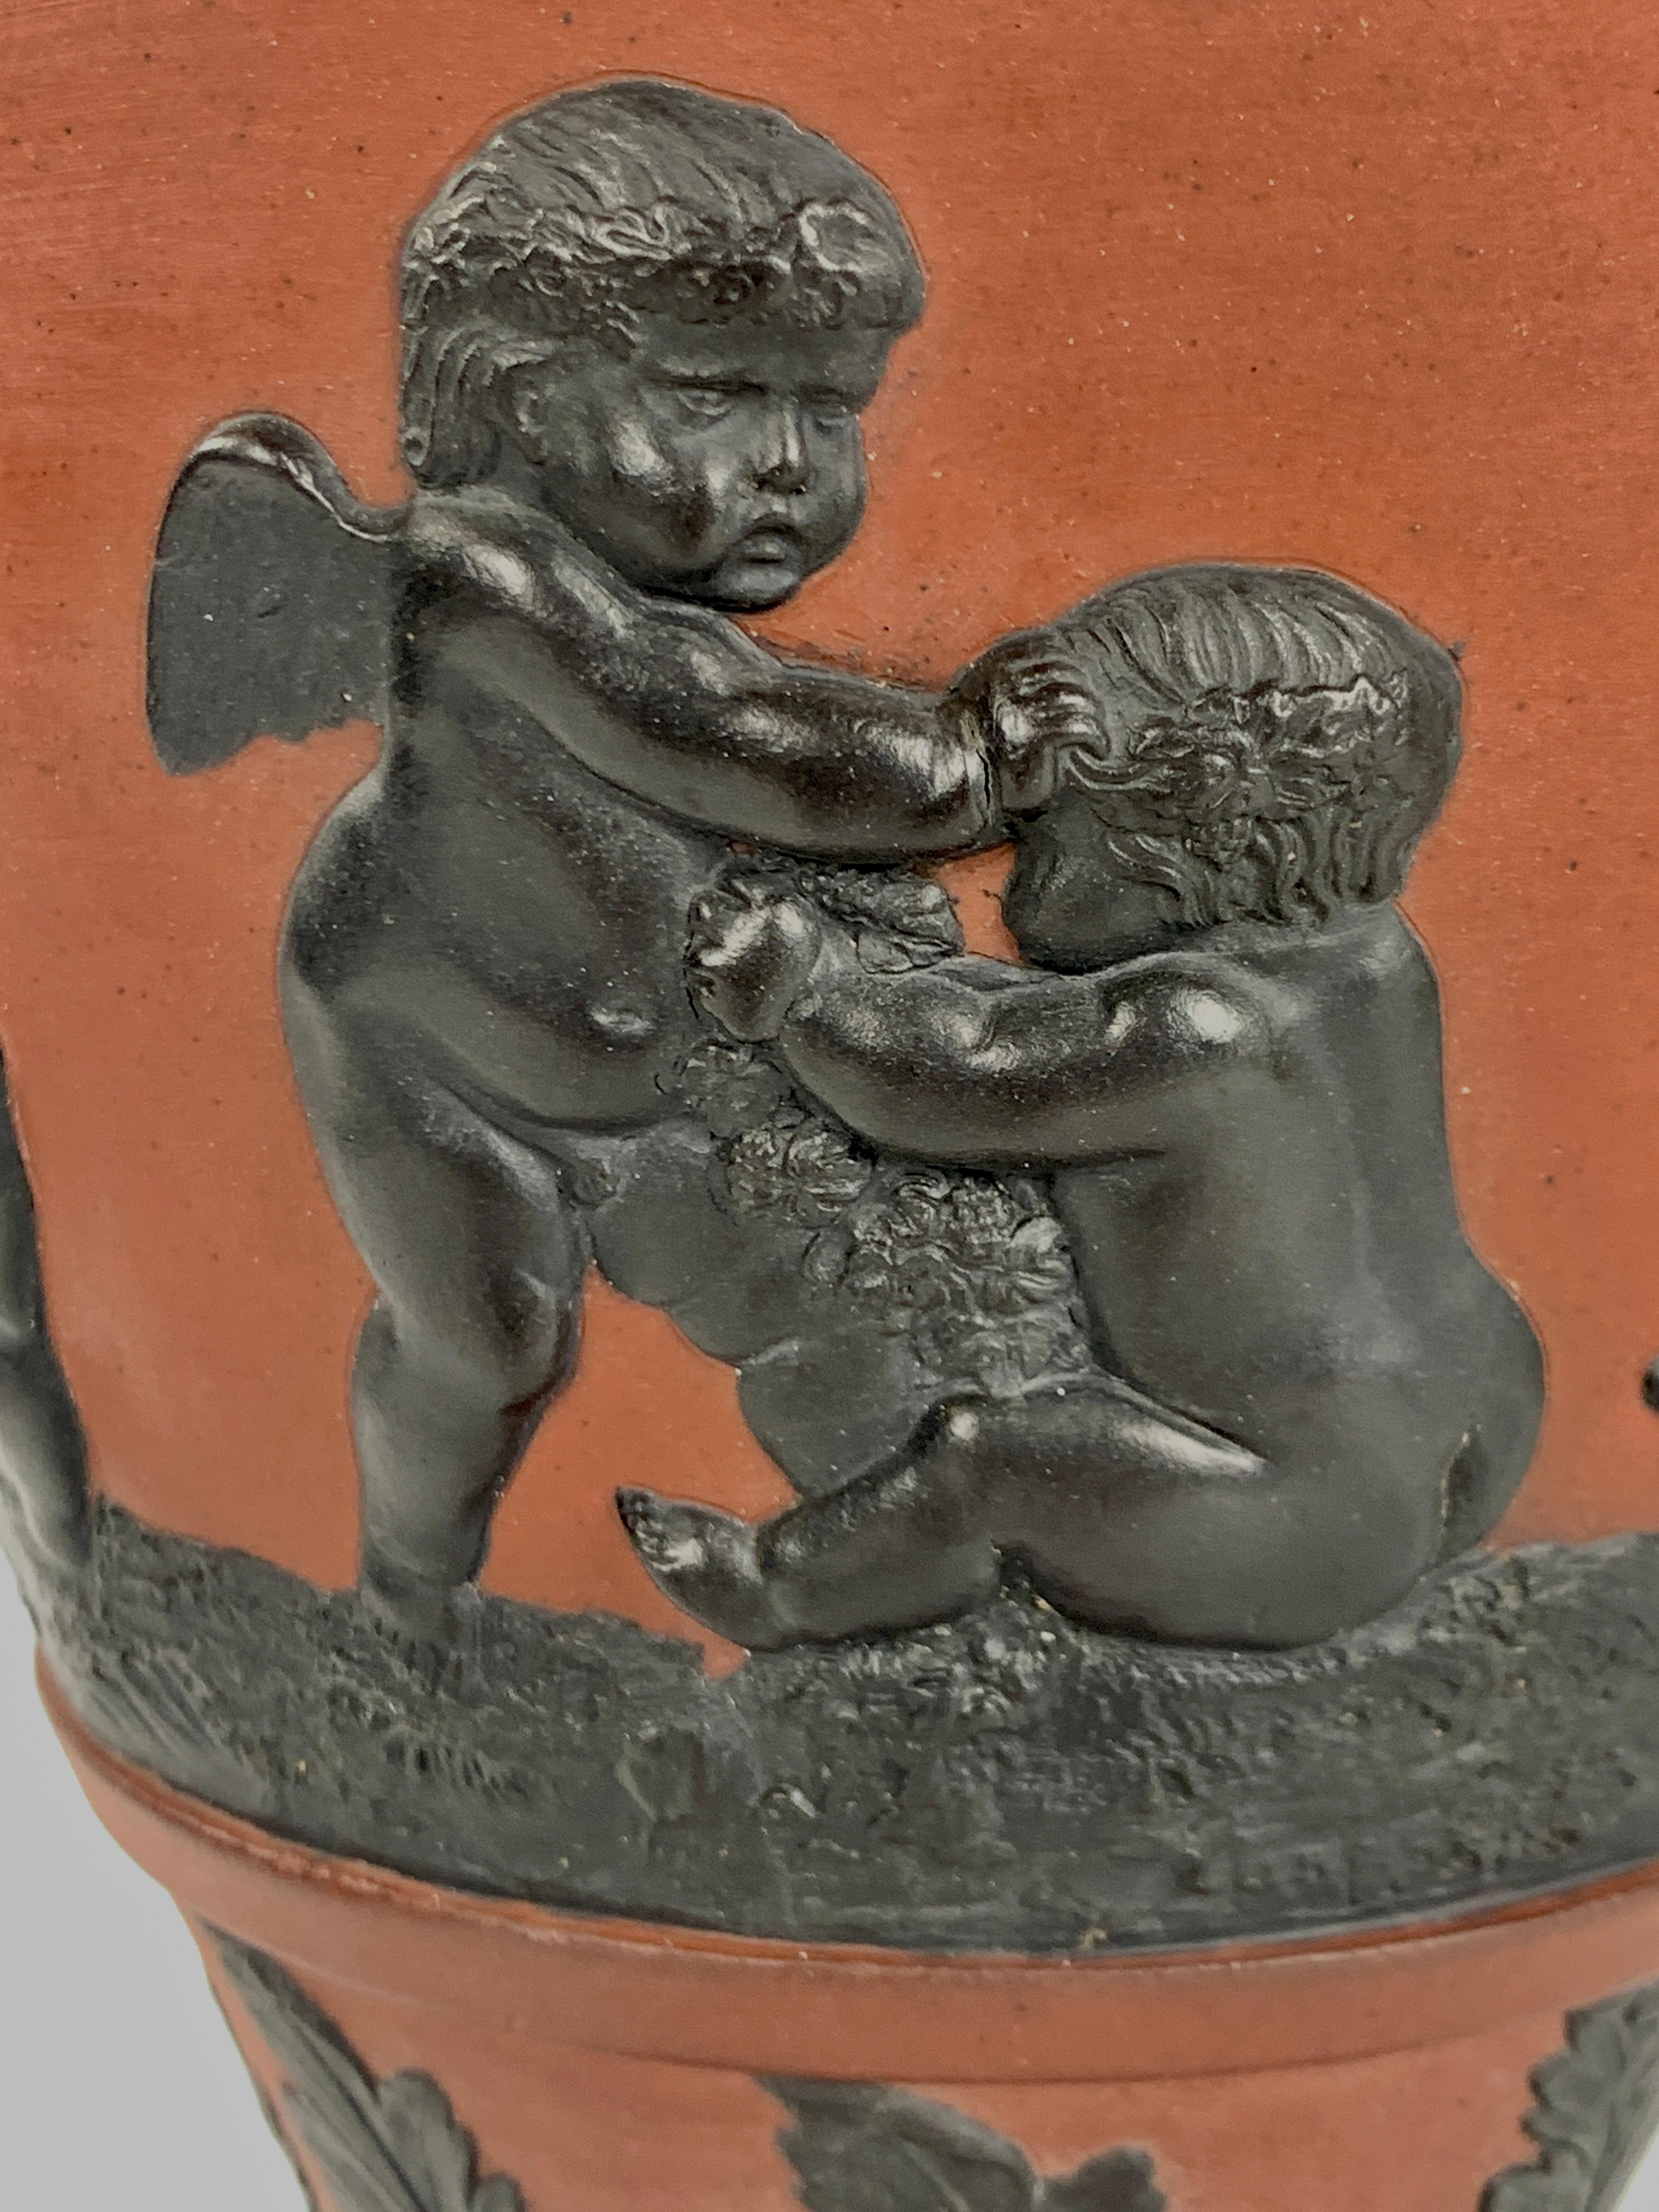 Molded Rosso Antico and Black Basalt Vase Made Circa 1815 with Neoclassical Decoration